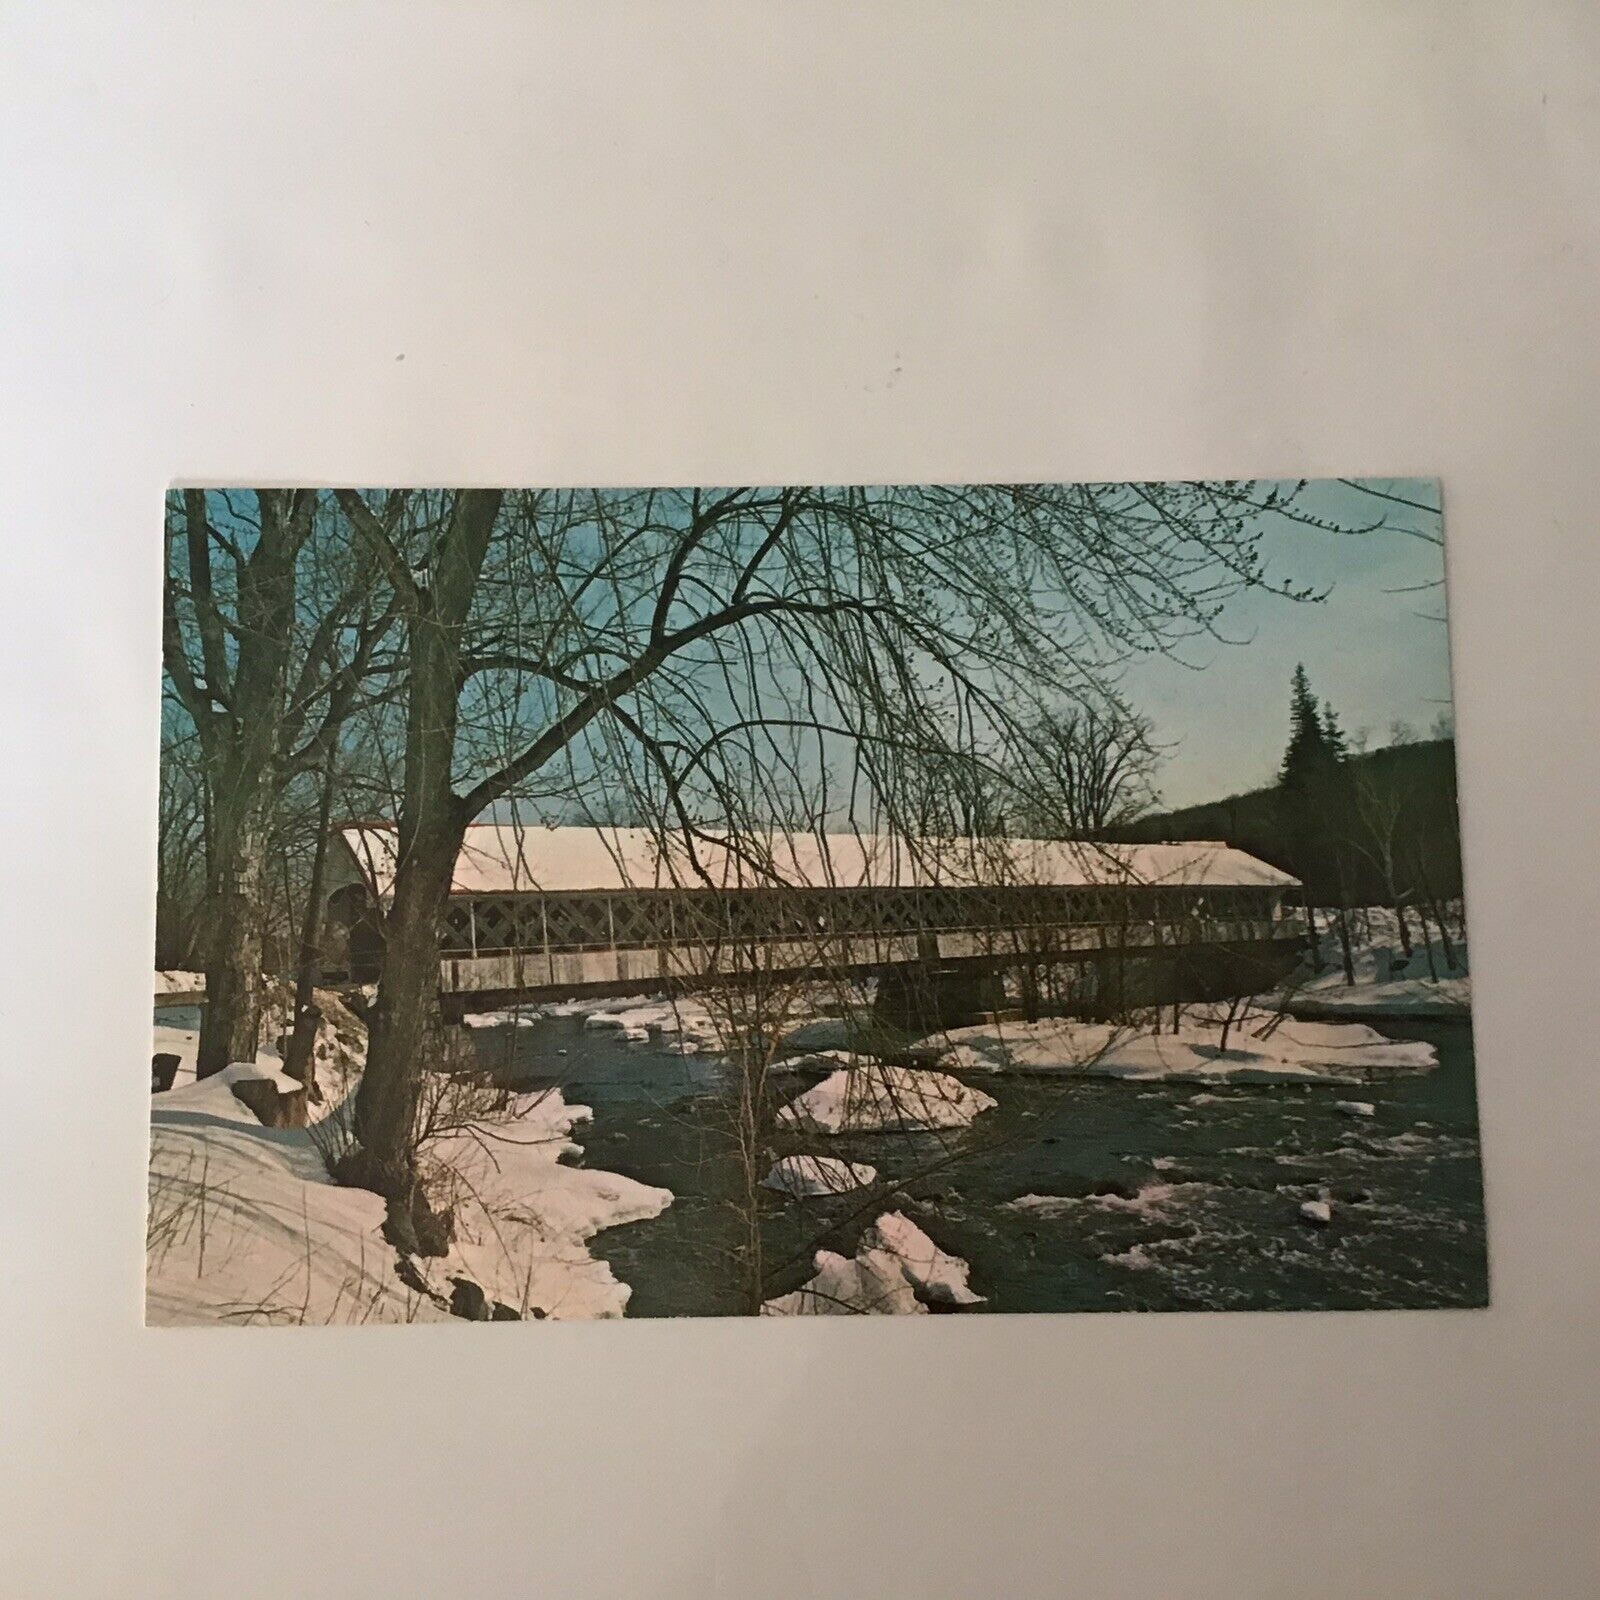 Covered Bridge Ashuelot River Winchester Hinsdale New Hampshire Postcard 